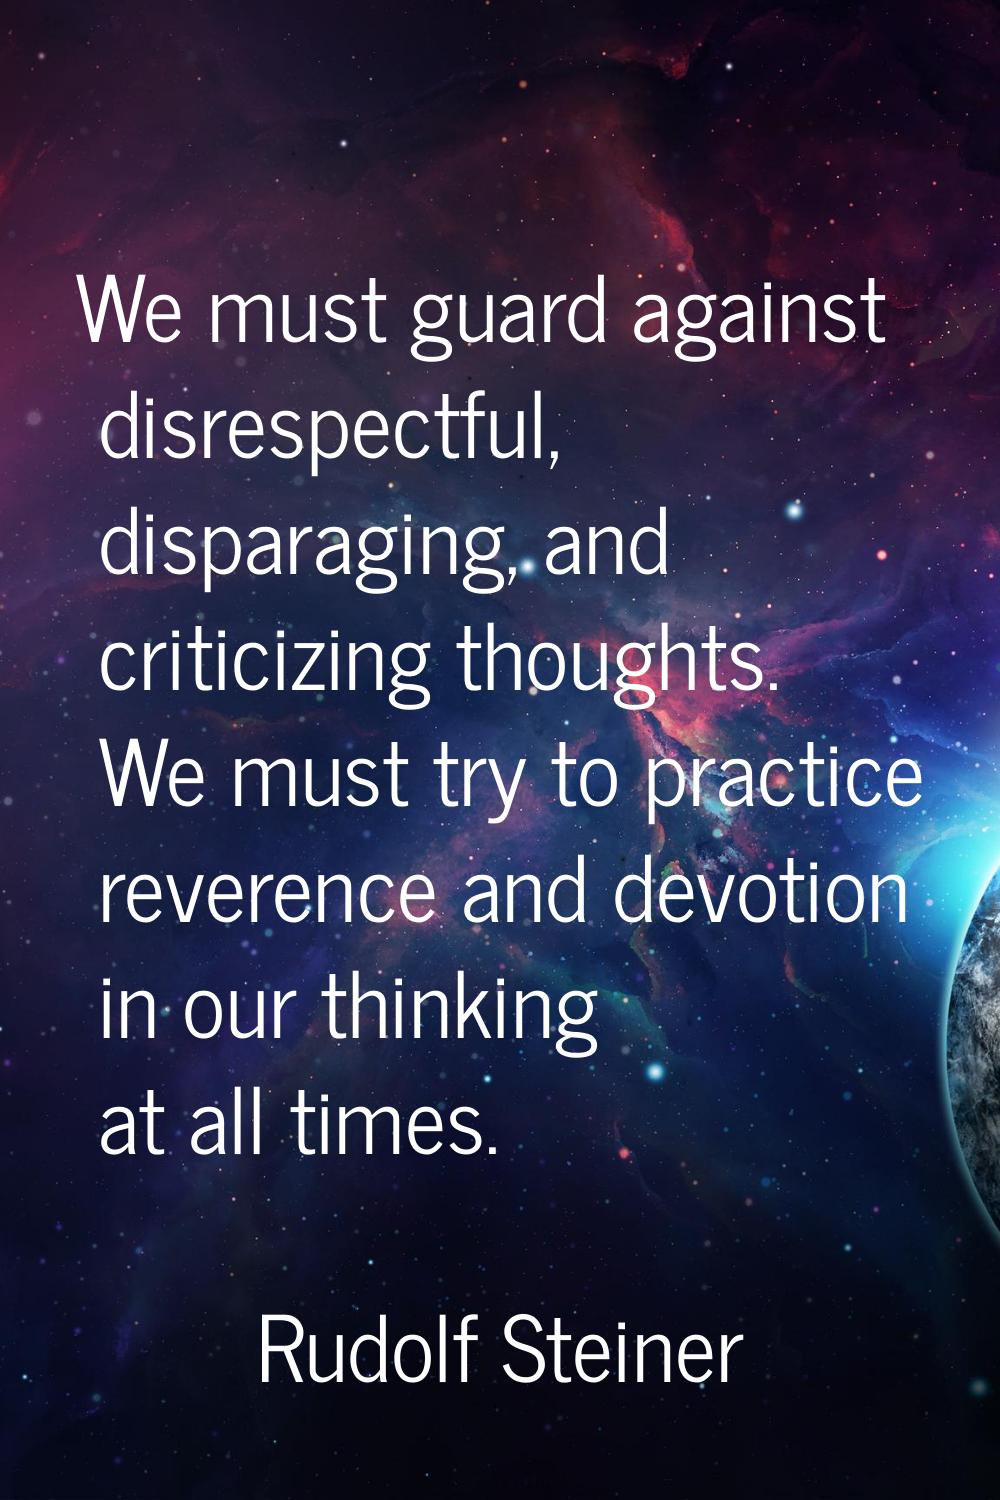 We must guard against disrespectful, disparaging, and criticizing thoughts. We must try to practice